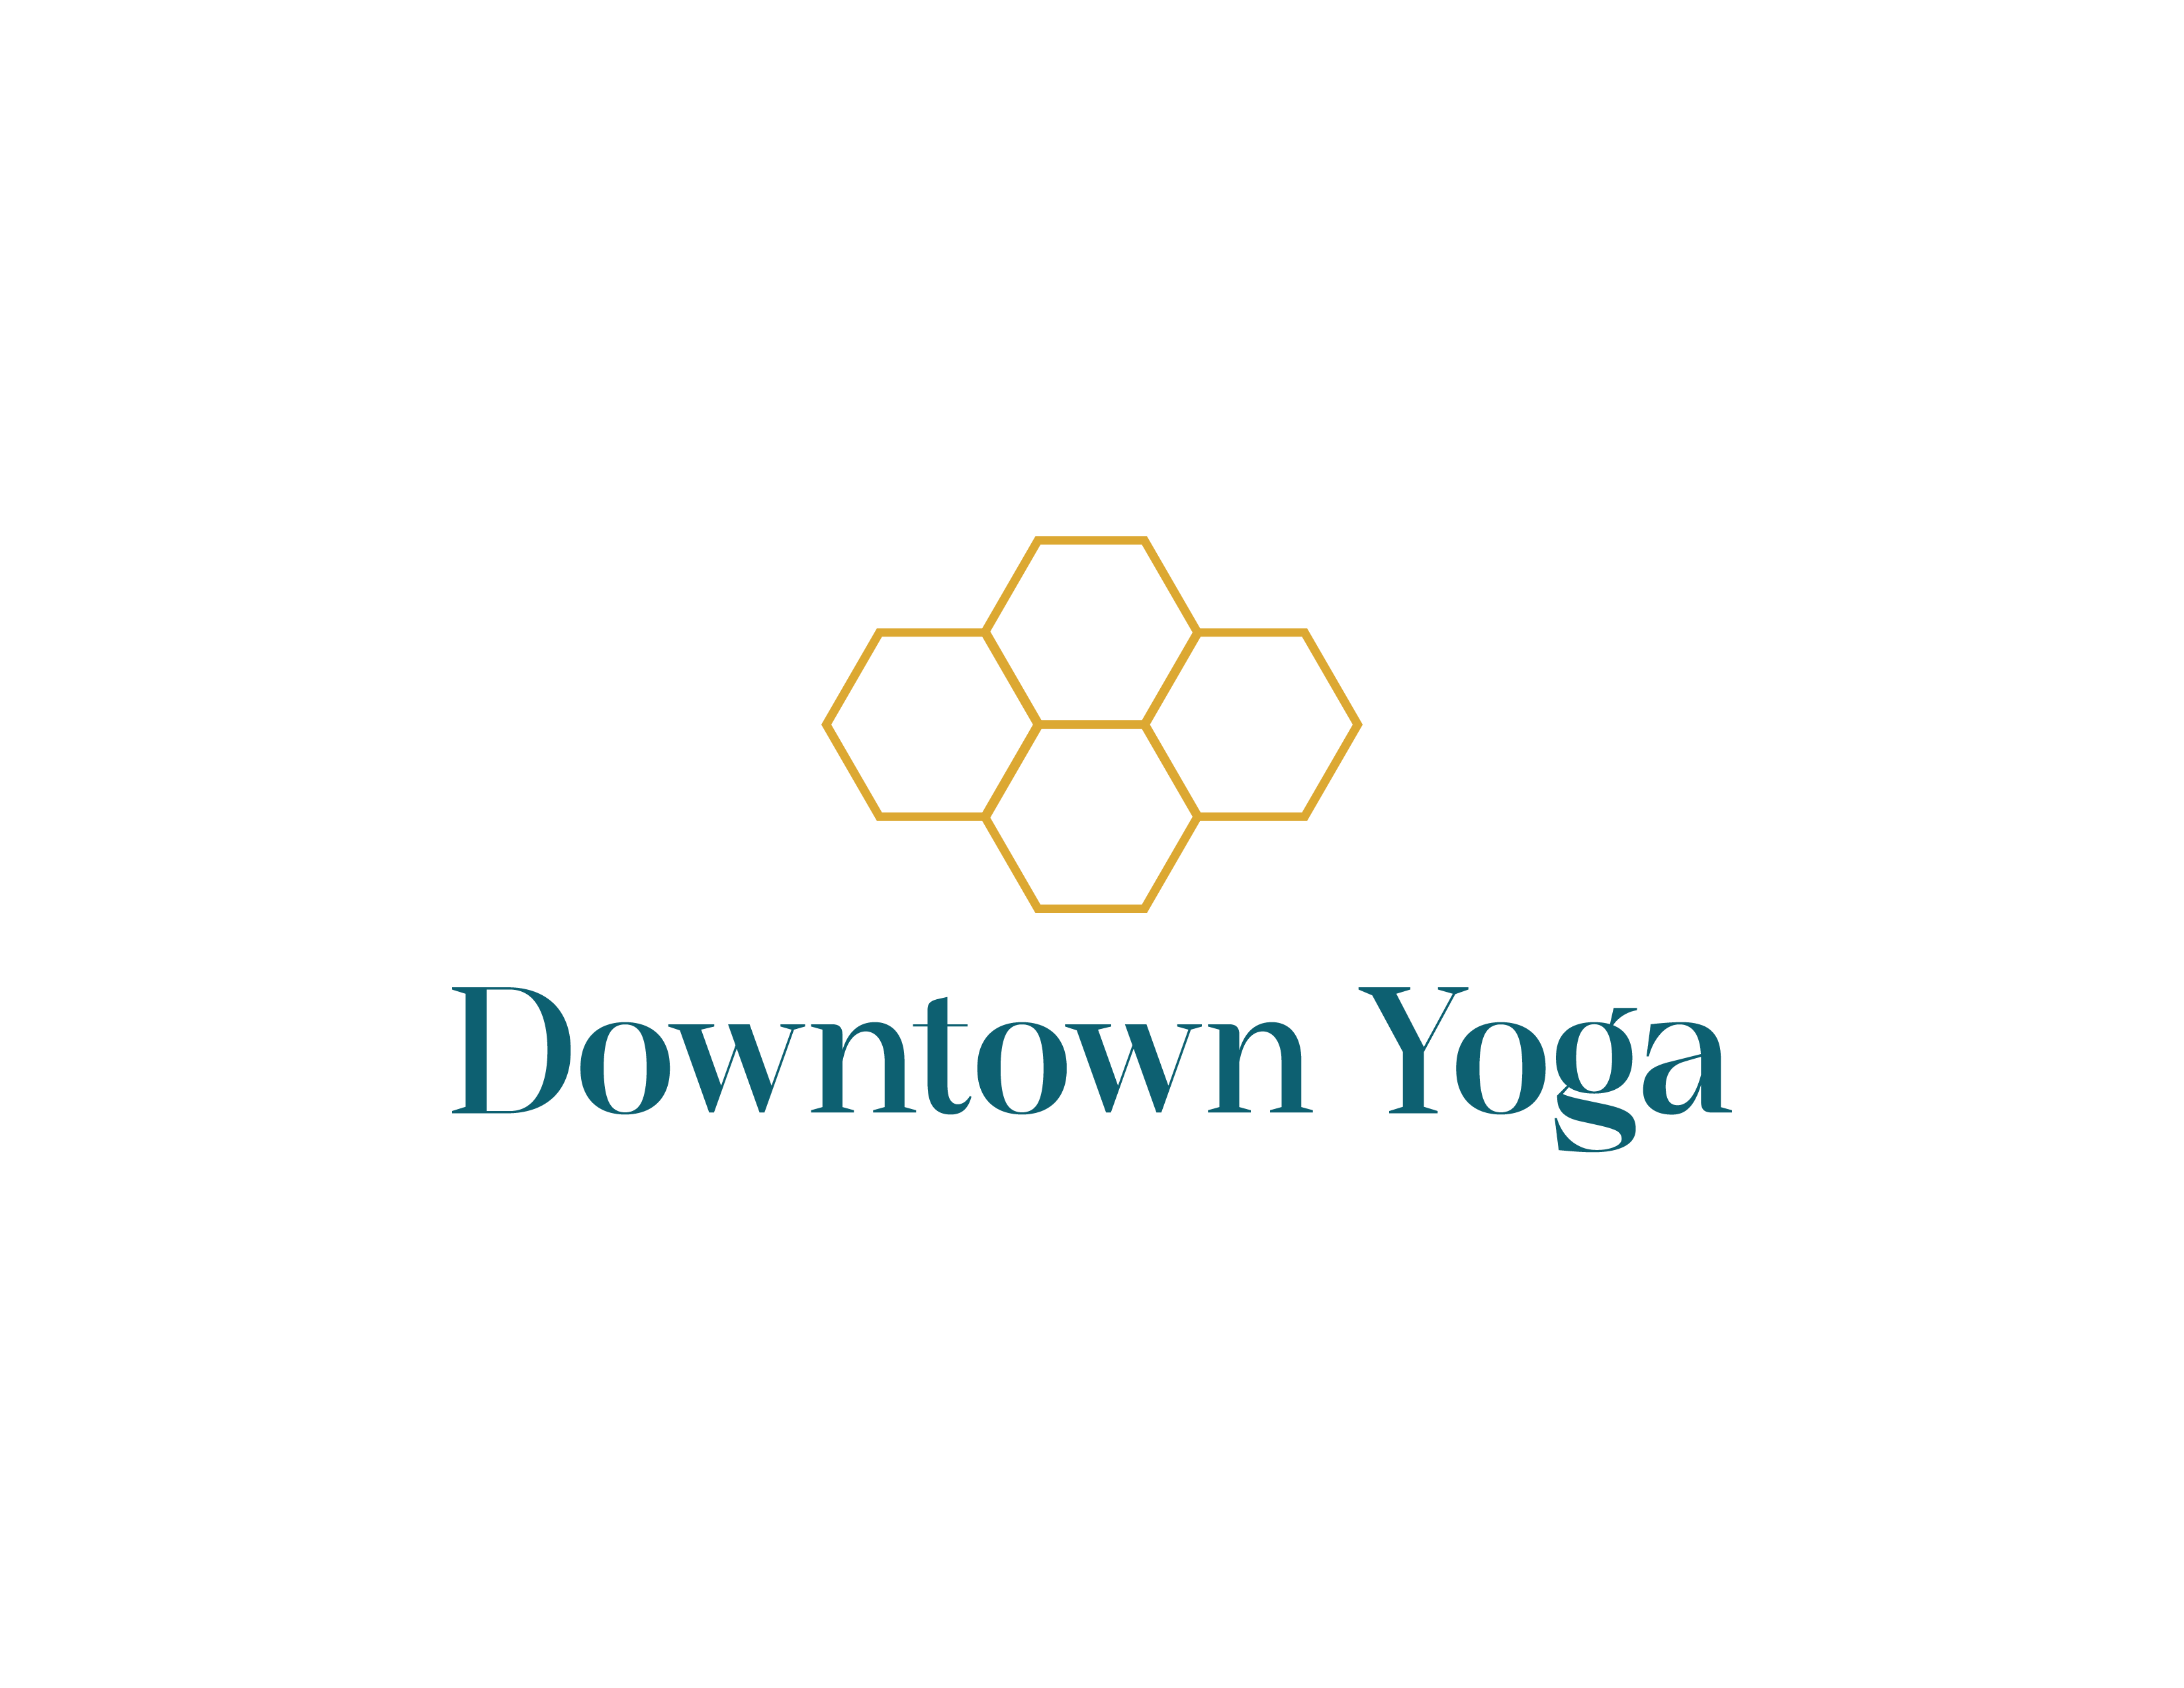 This image shows the logo for Downtown Yoga Fargo.